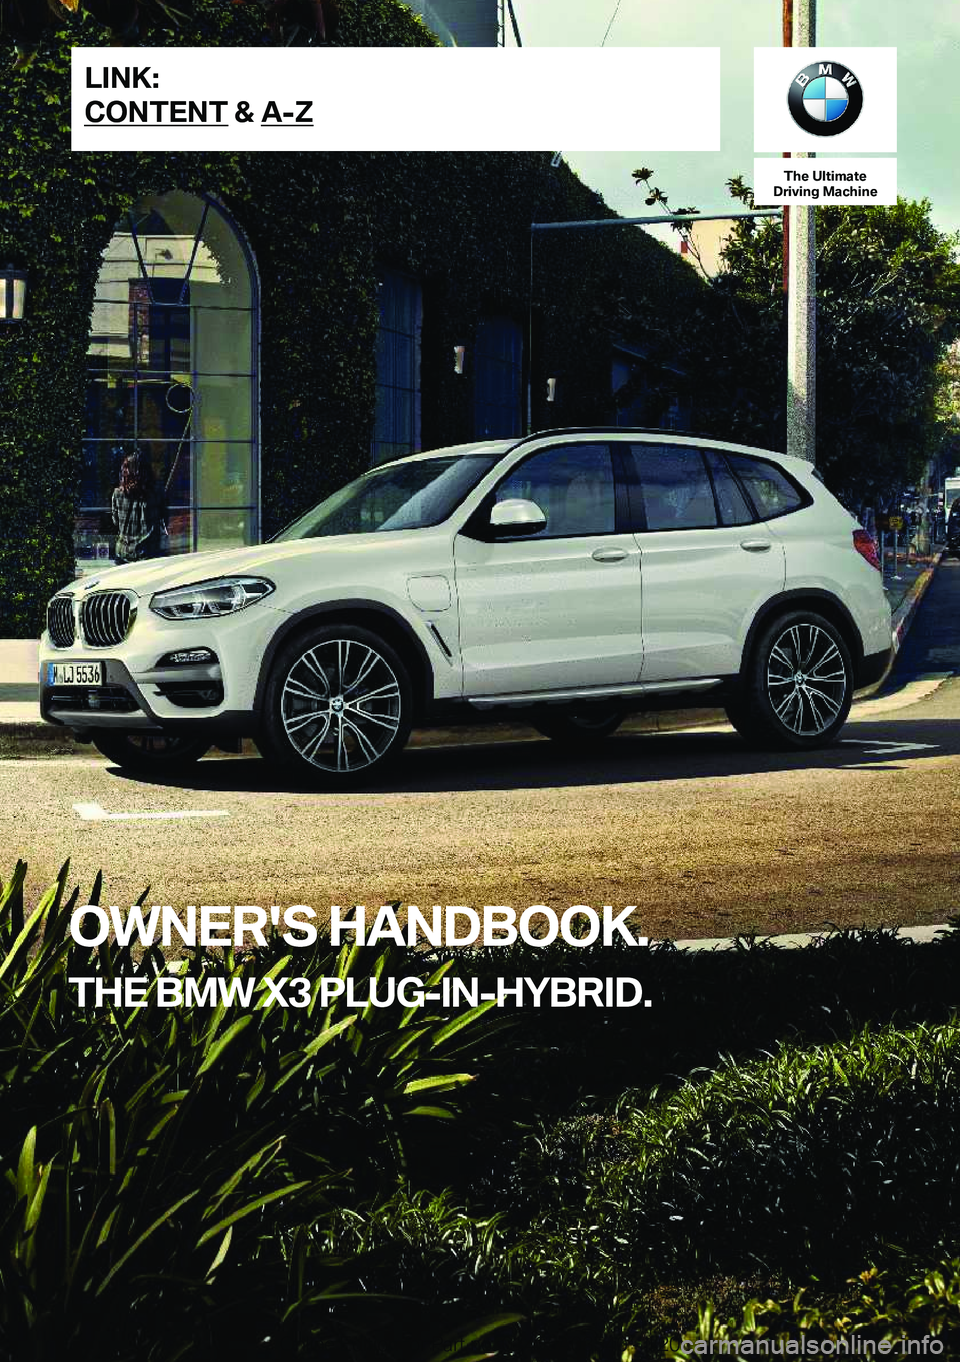 BMW X3 PLUG-IN HYBRID 2020  Owners Manual �T�h�e��U�l�t�i�m�a�t�e
�D�r�i�v�i�n�g��M�a�c�h�i�n�e
�O�W�N�E�R�'�S��H�A�N�D�B�O�O�K�.
�T�H�E��B�M�W��X�3��P�L�U�G�-�I�N�-�H�Y�B�R�I�D�.�L�I�N�K�:
�C�O�N�T�E�N�T��&��A�-�Z�O�n�l�i�n�e��E